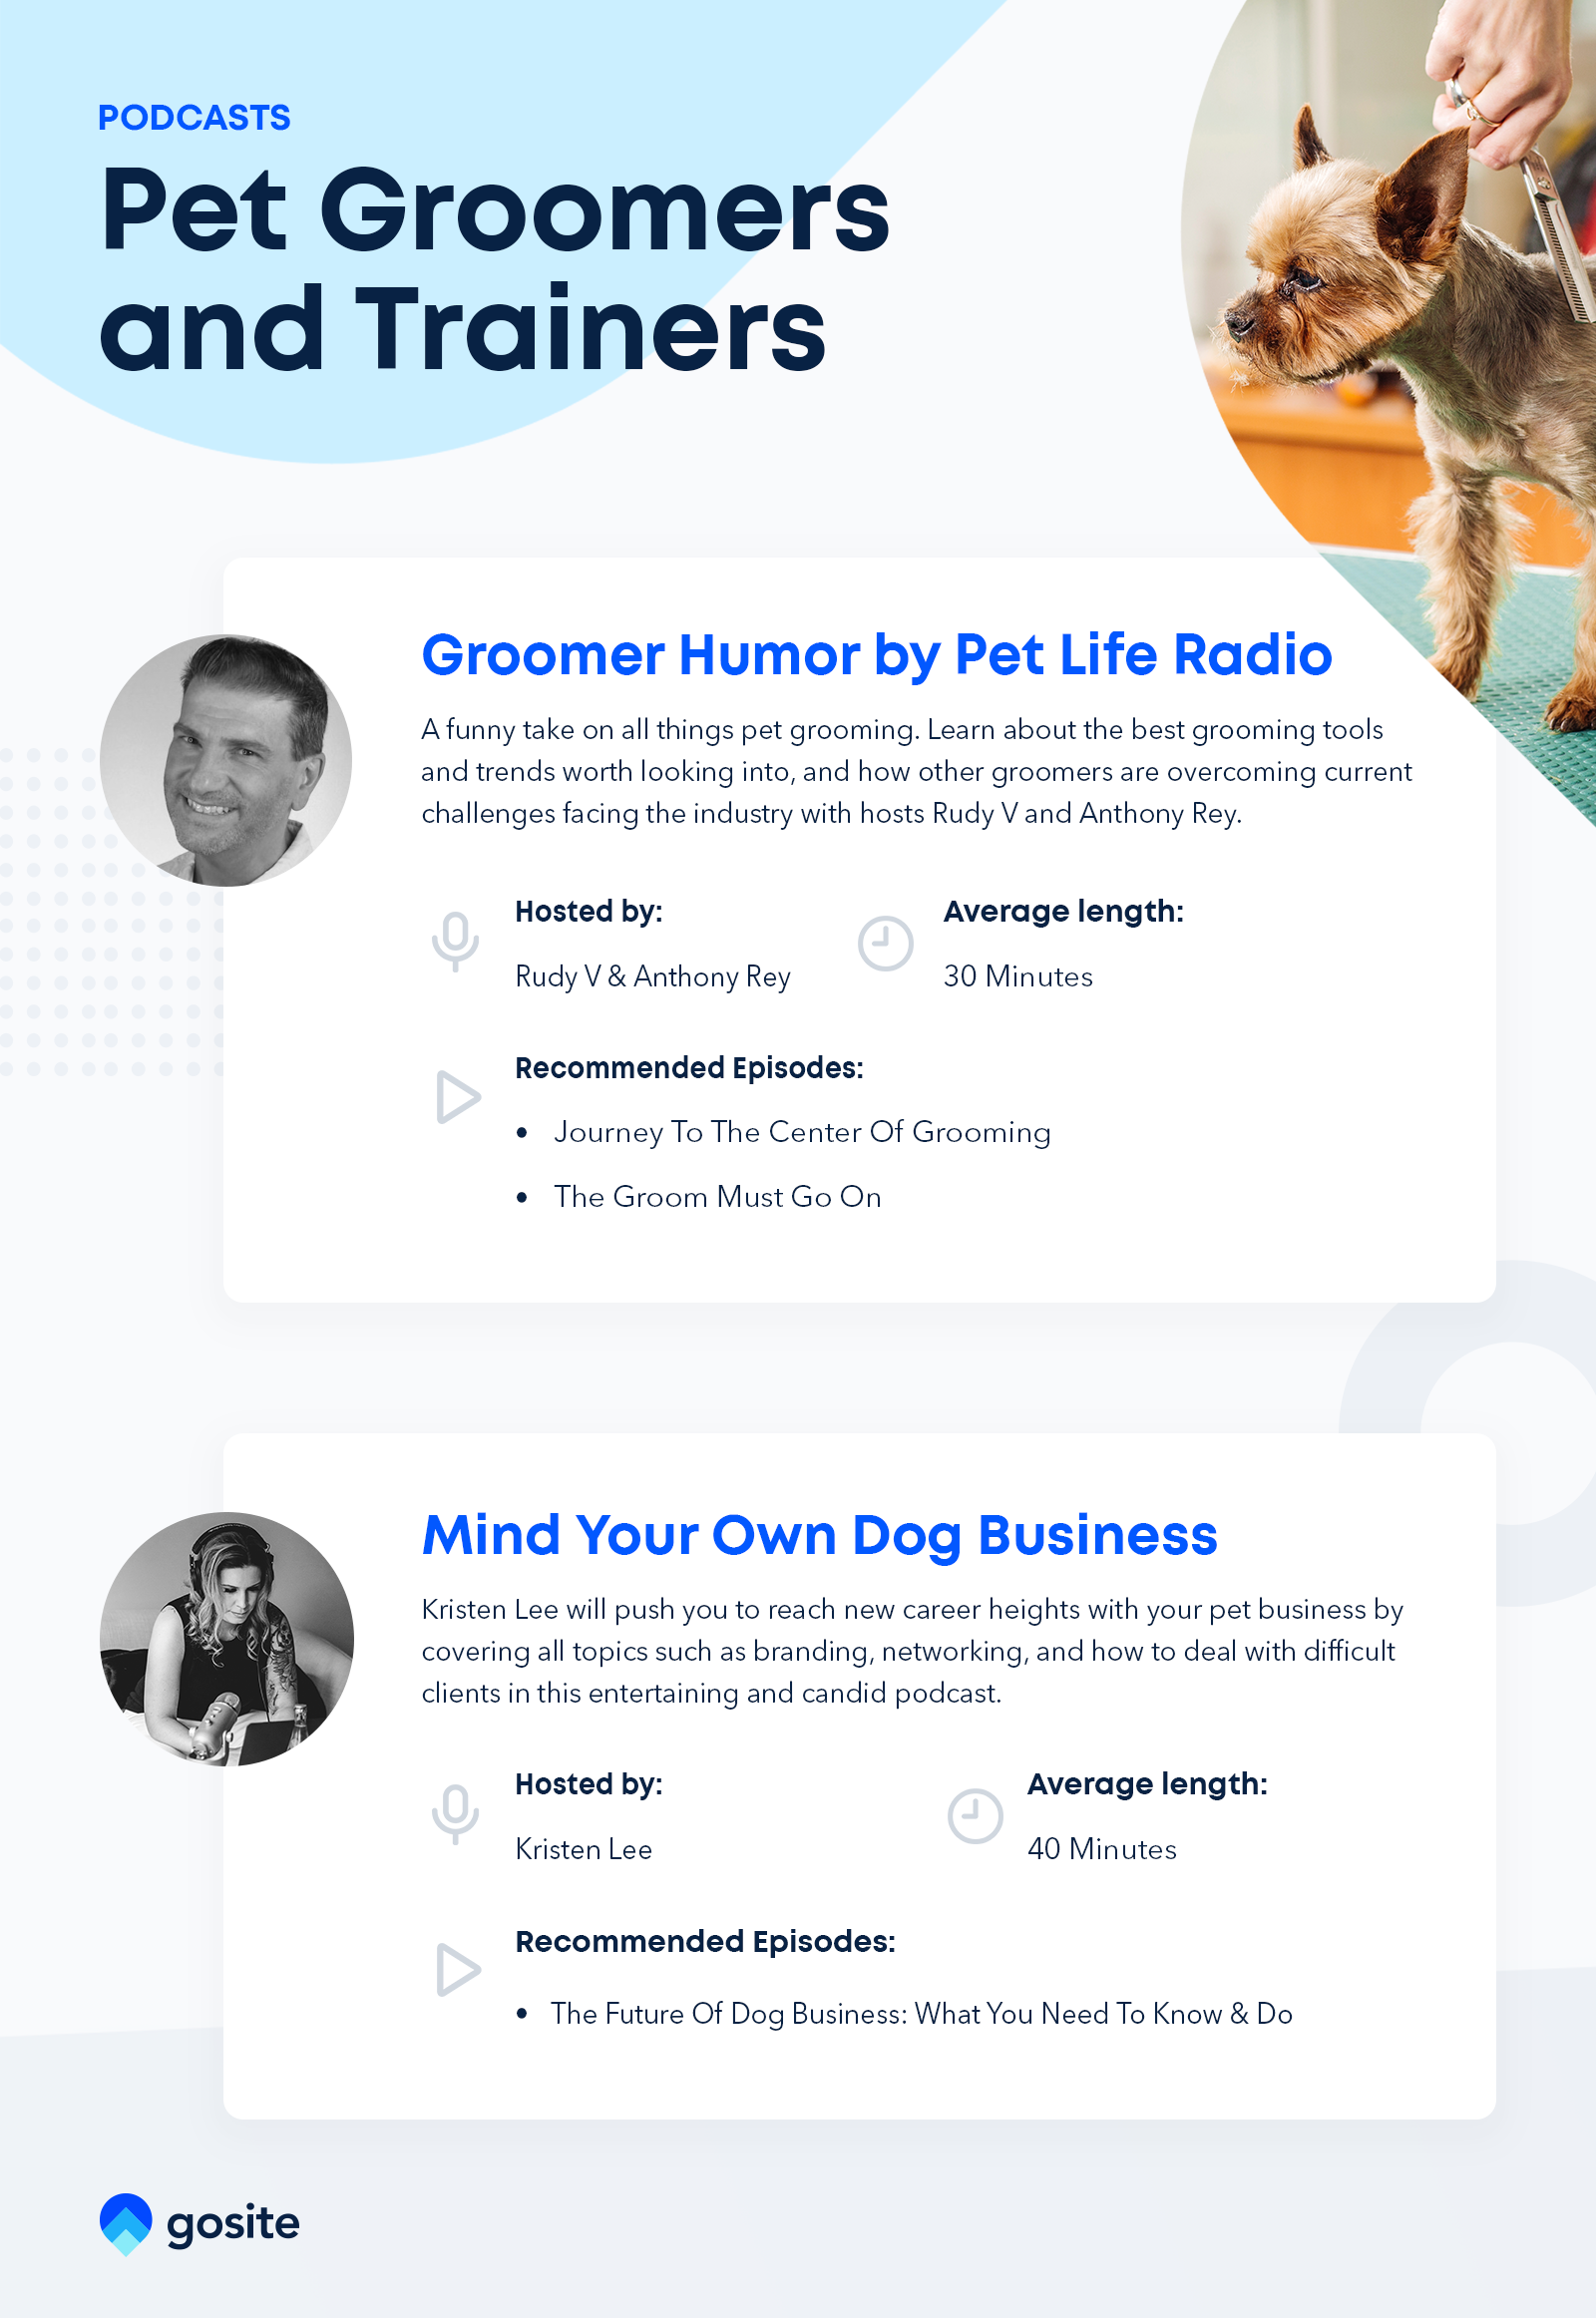 Podcasts for pet grooming and dog training professionals.